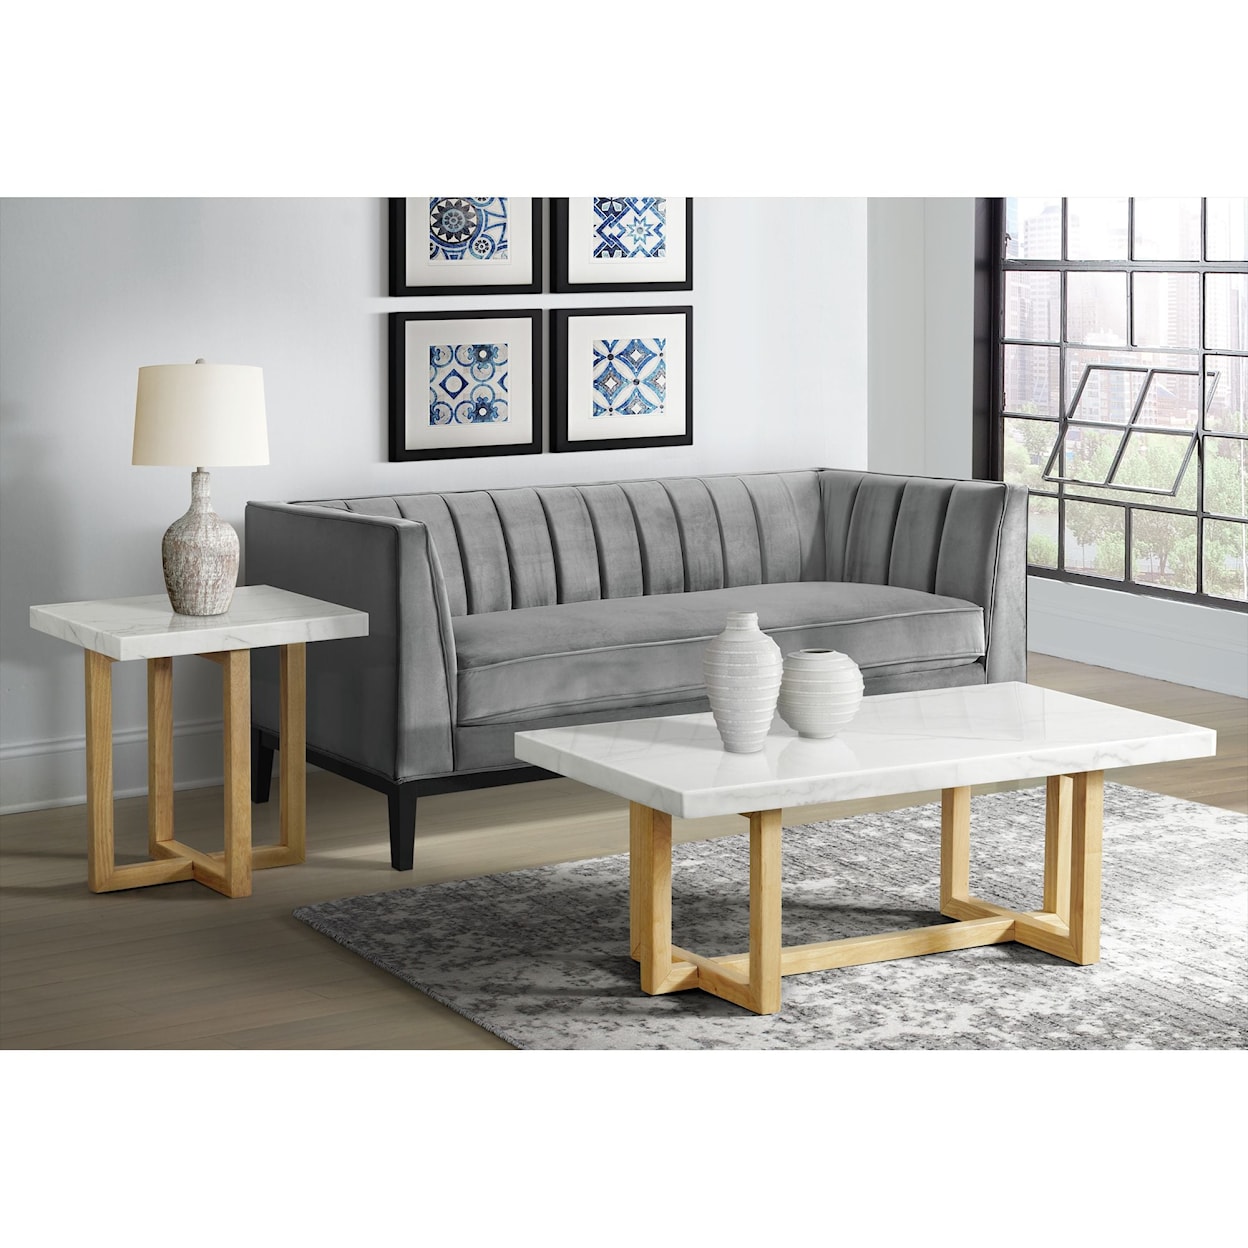 Elements International Morris Natural Natural Coffee Table with White Marble Top